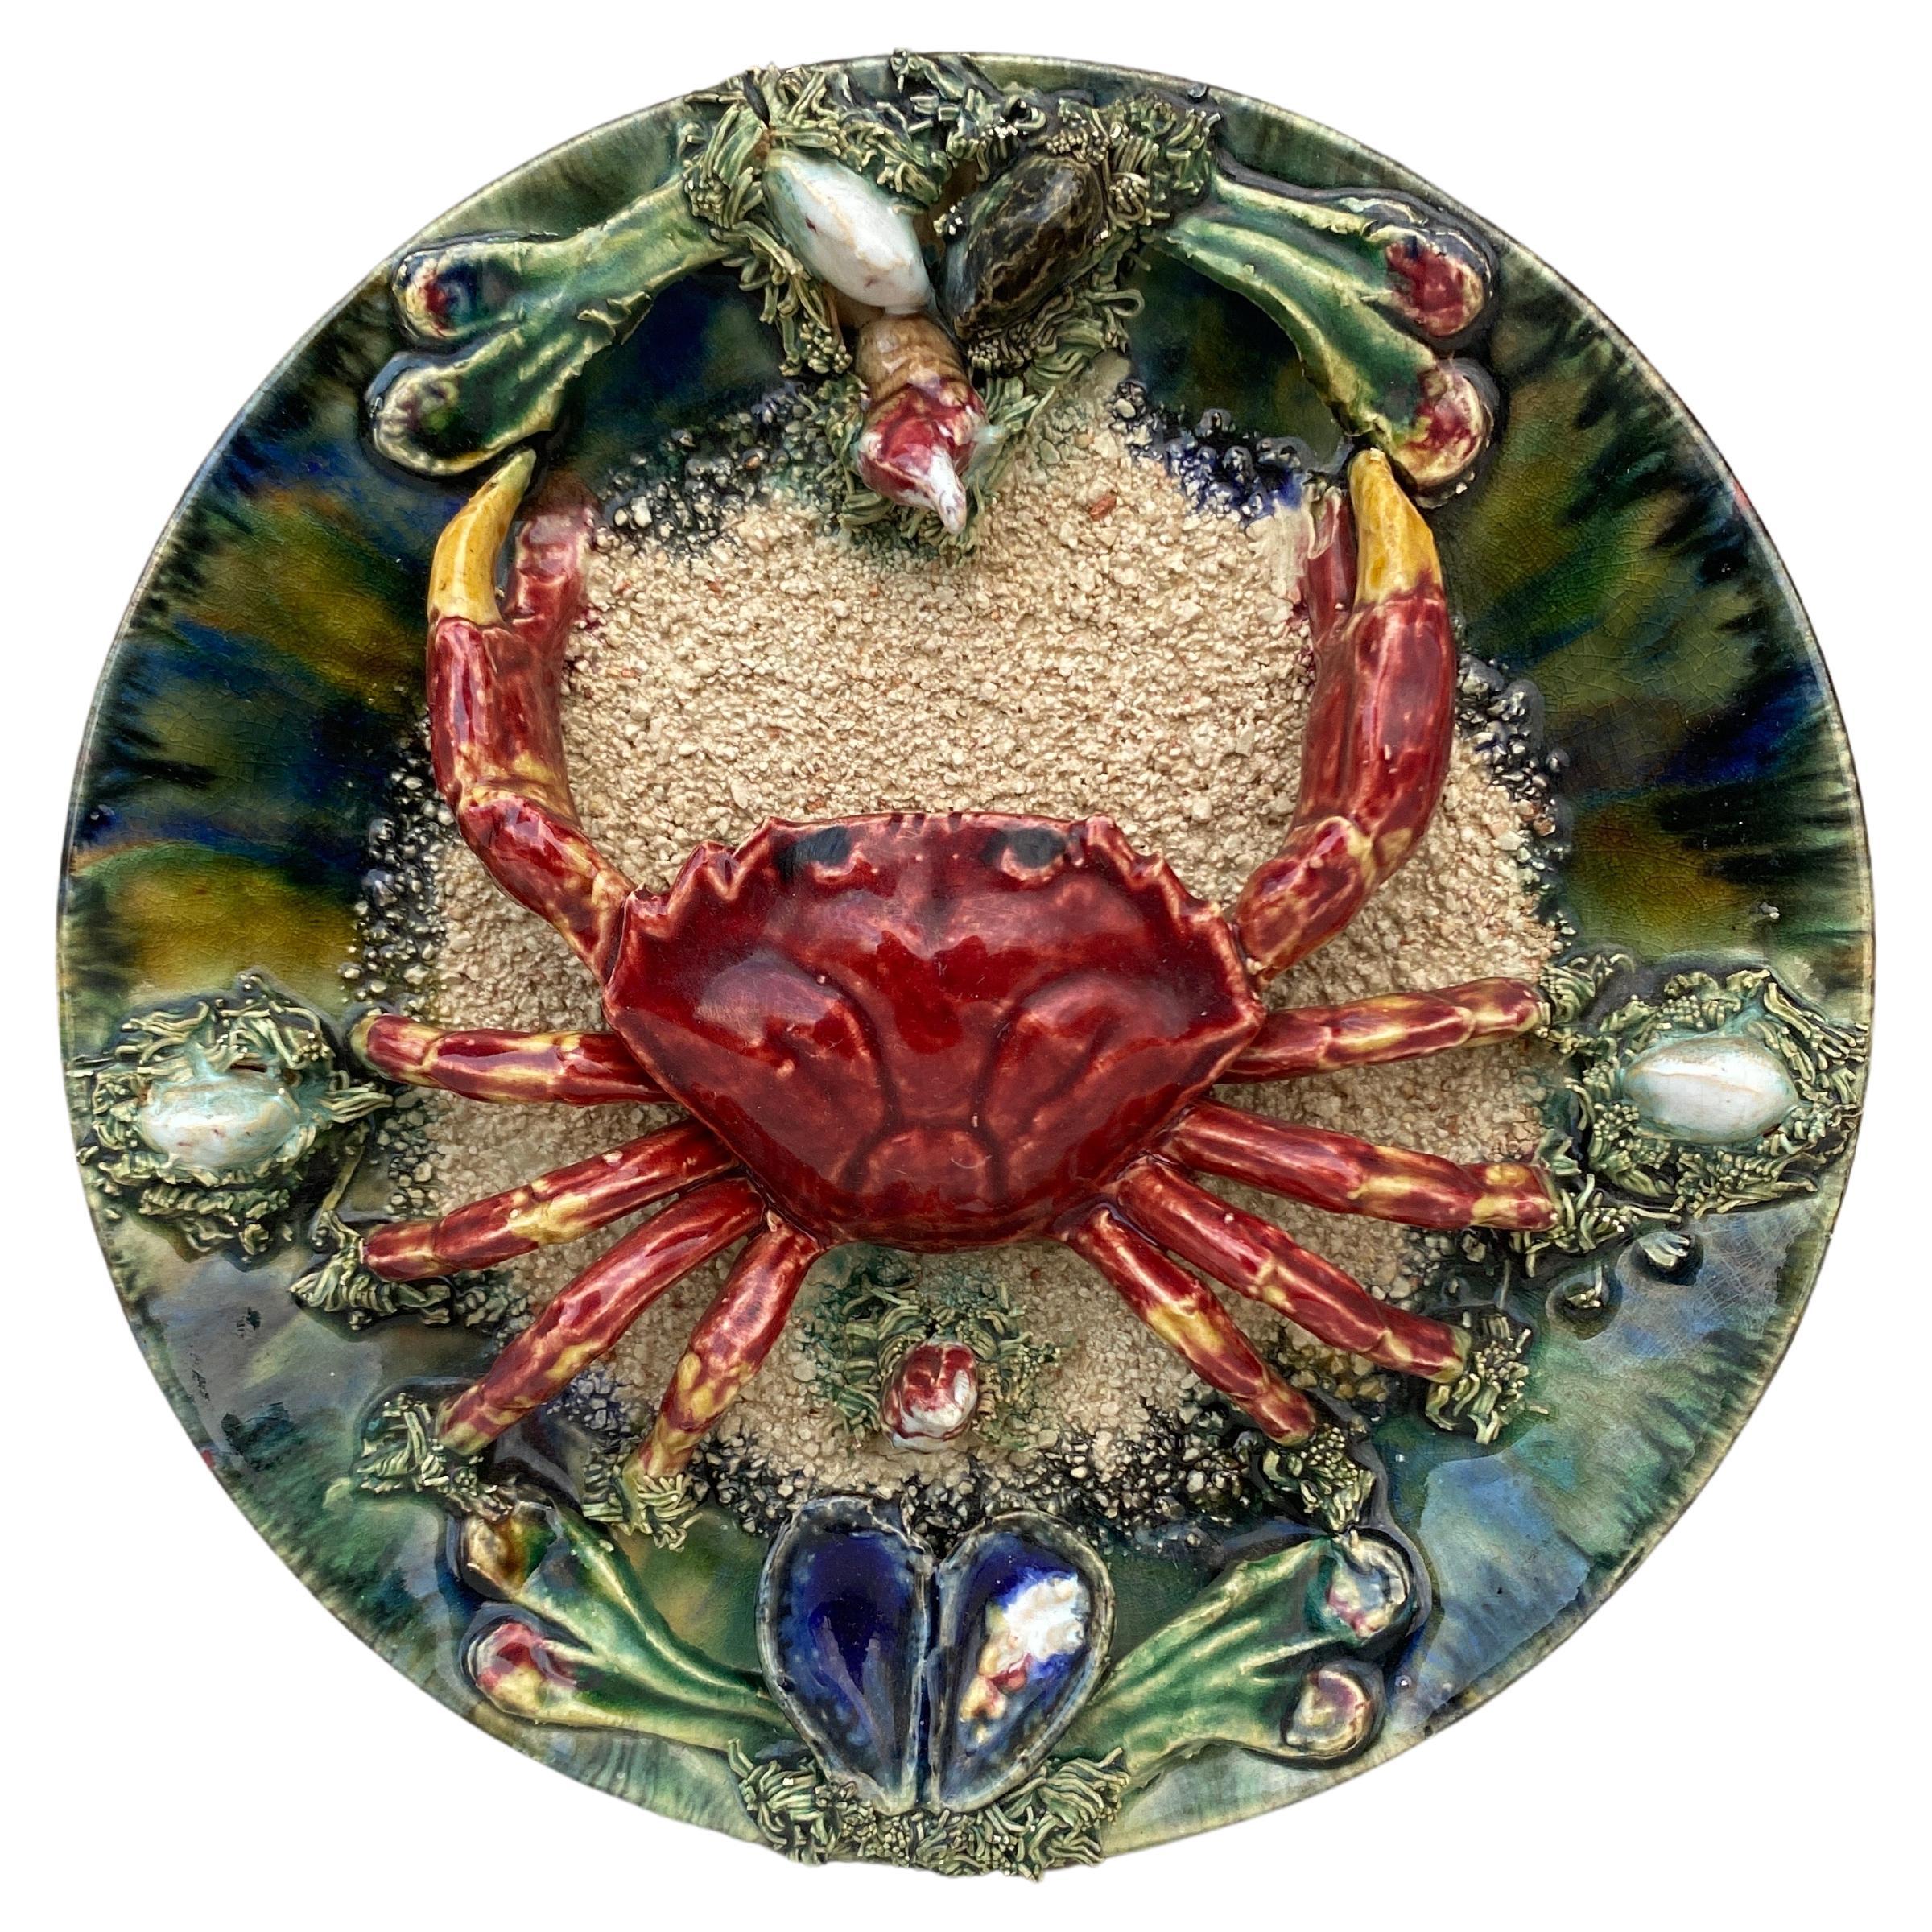 Majolica faience Palissy Portuguese crab platter circa 1940.
Decorated with mussels and shells,
Signed Caldas da Rainha.
 